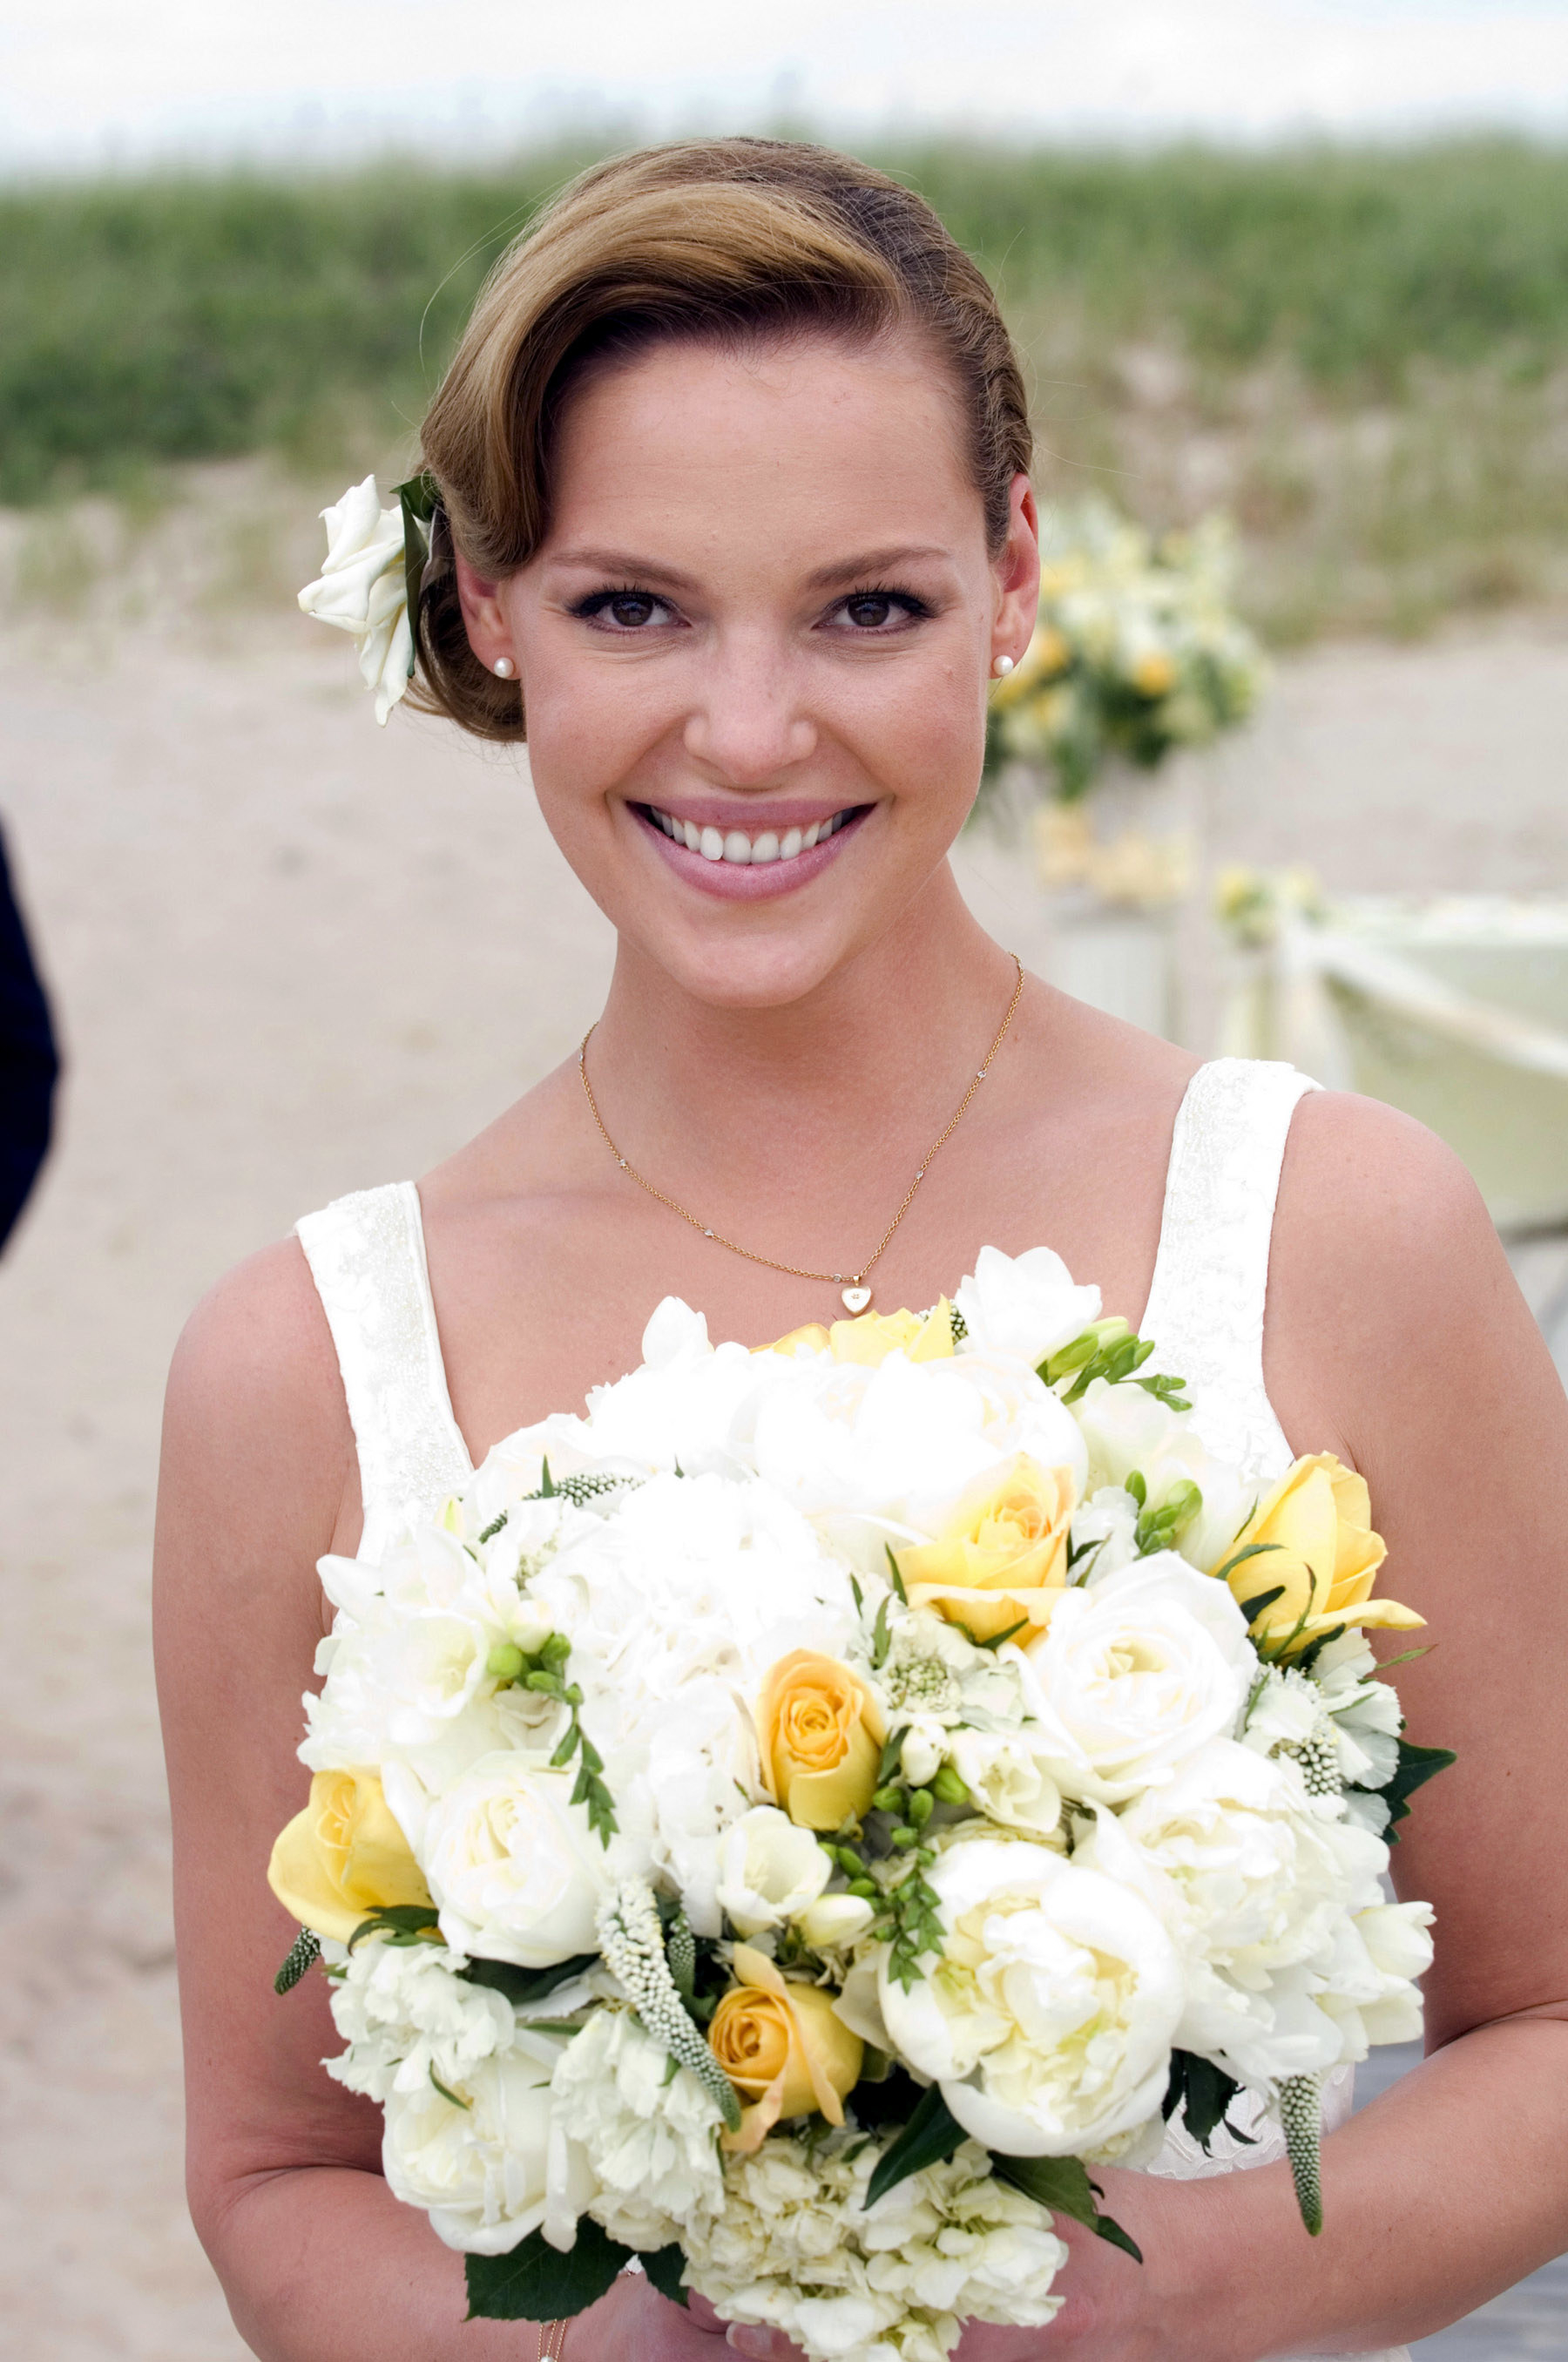 Katherine wearing a sleeveless dress and a bow in her hair and holding a bouquet